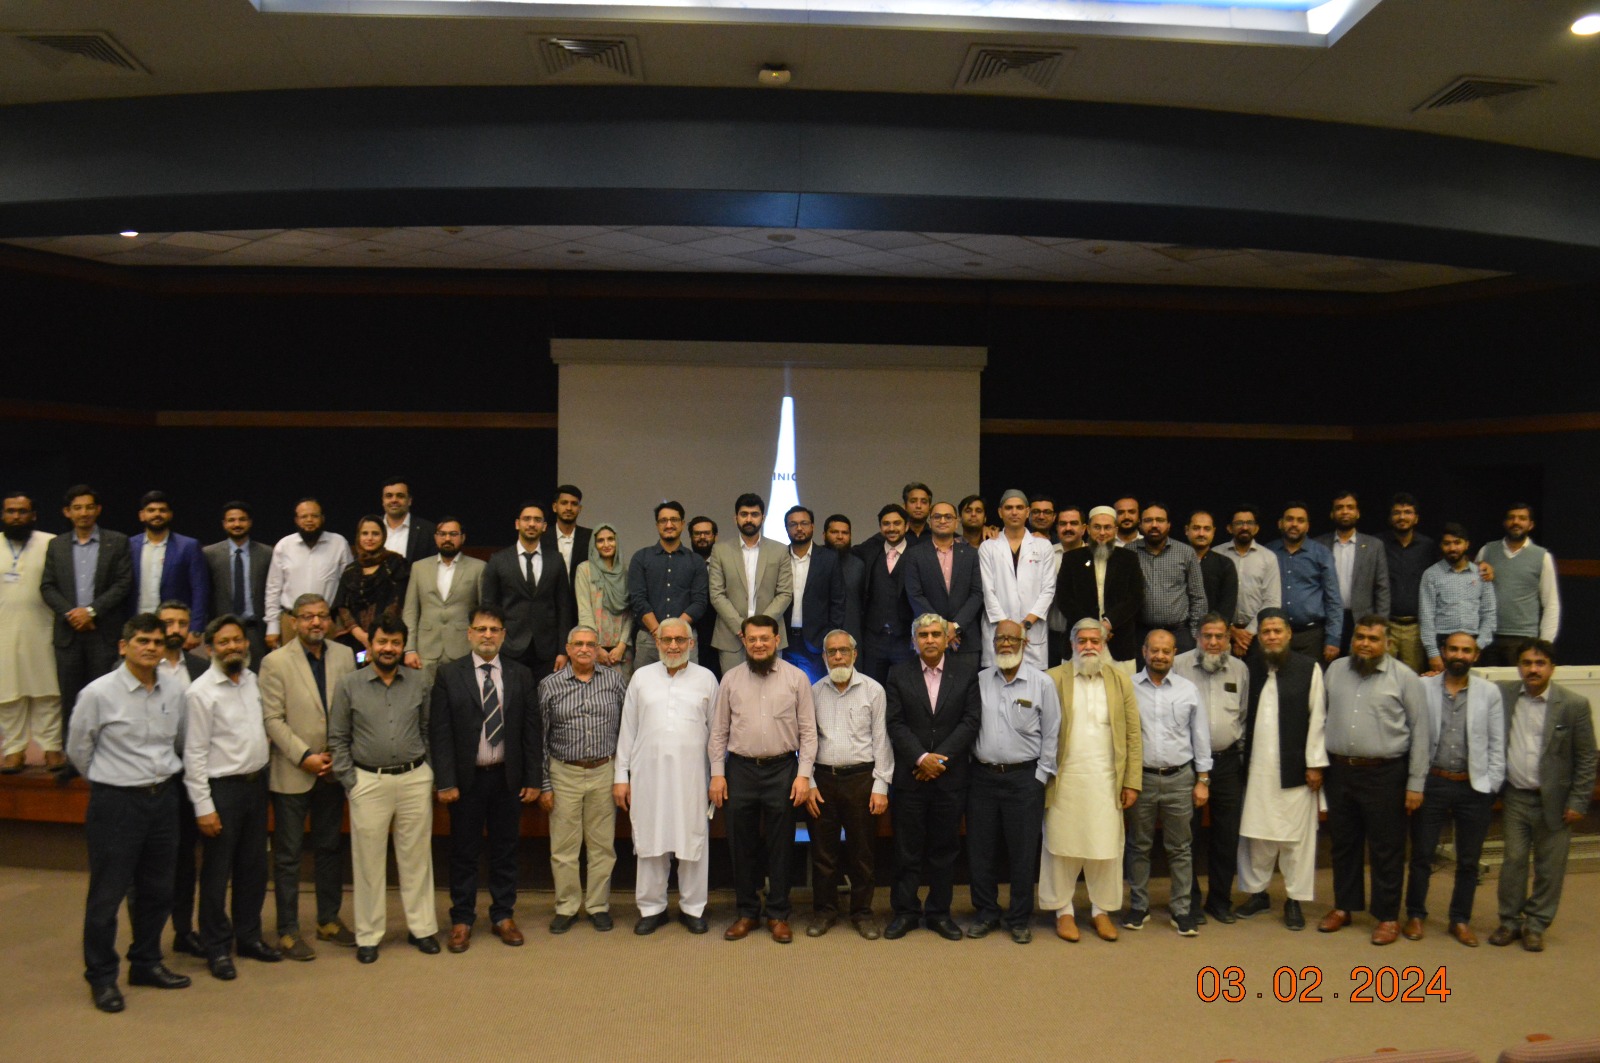 265th Monthly Clinical Conference at Liaquat National Hospital Karachi on 3rd February 2024